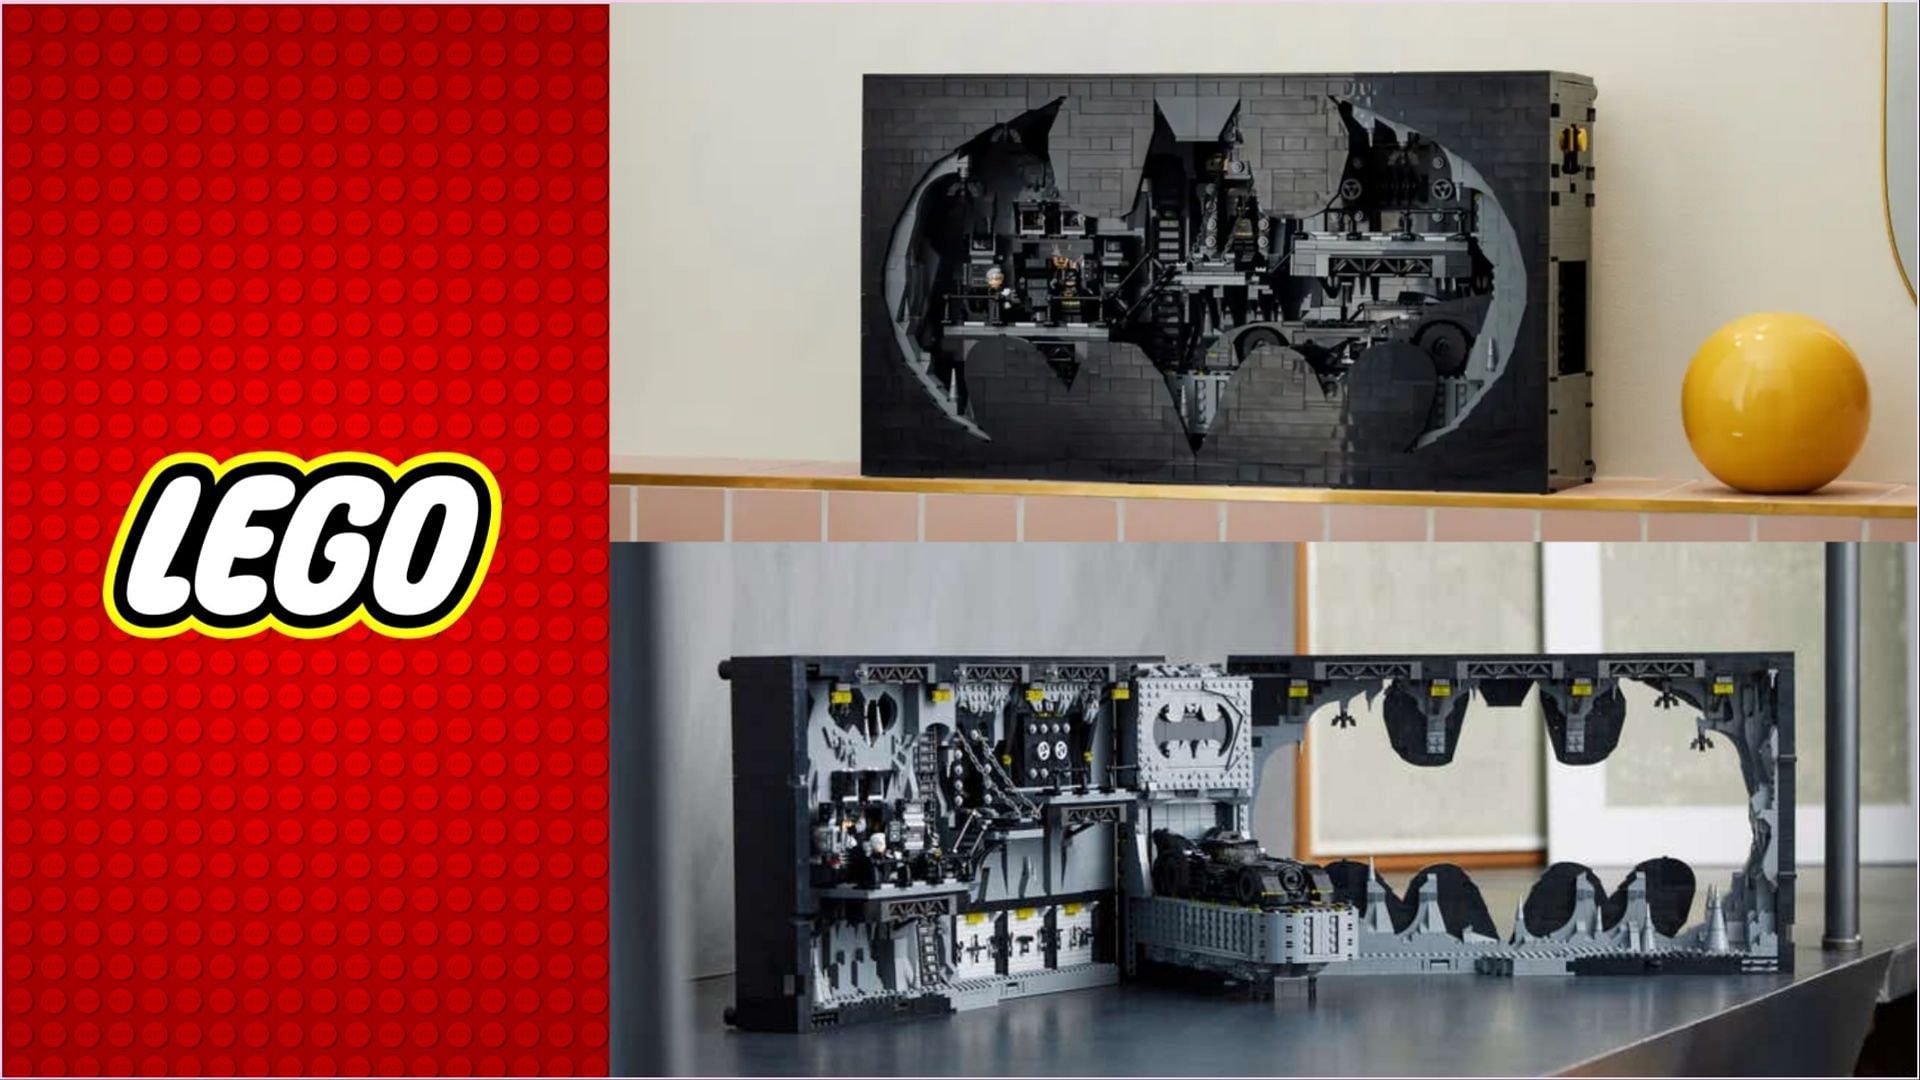 Lego announce new Batcave set from the Batman Returns movie